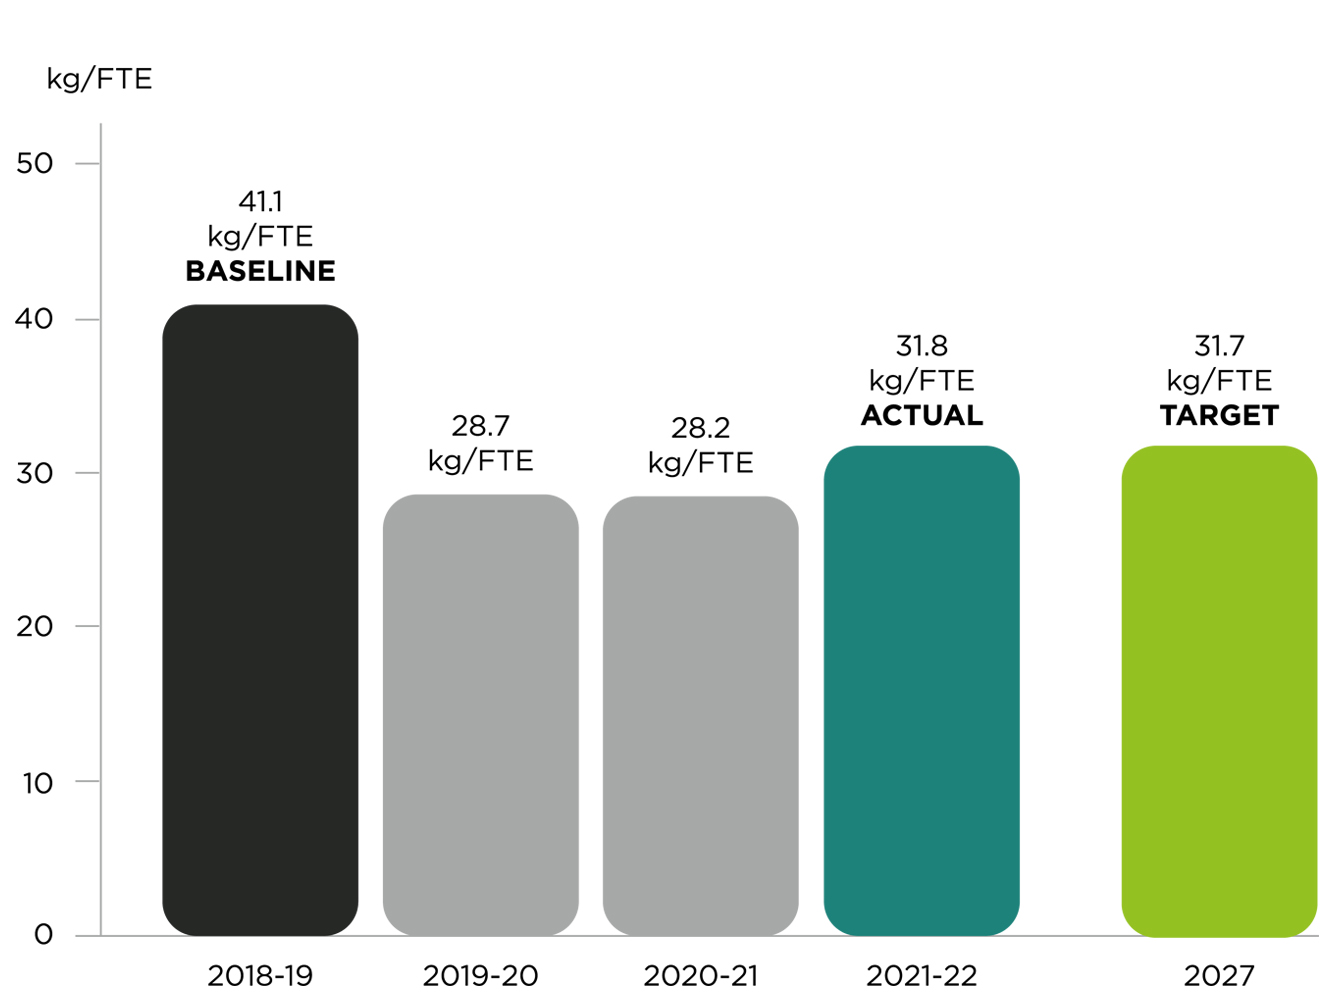 Overall waste reductions pattern for the university towards a 31.7kg/FTE goal by 2027